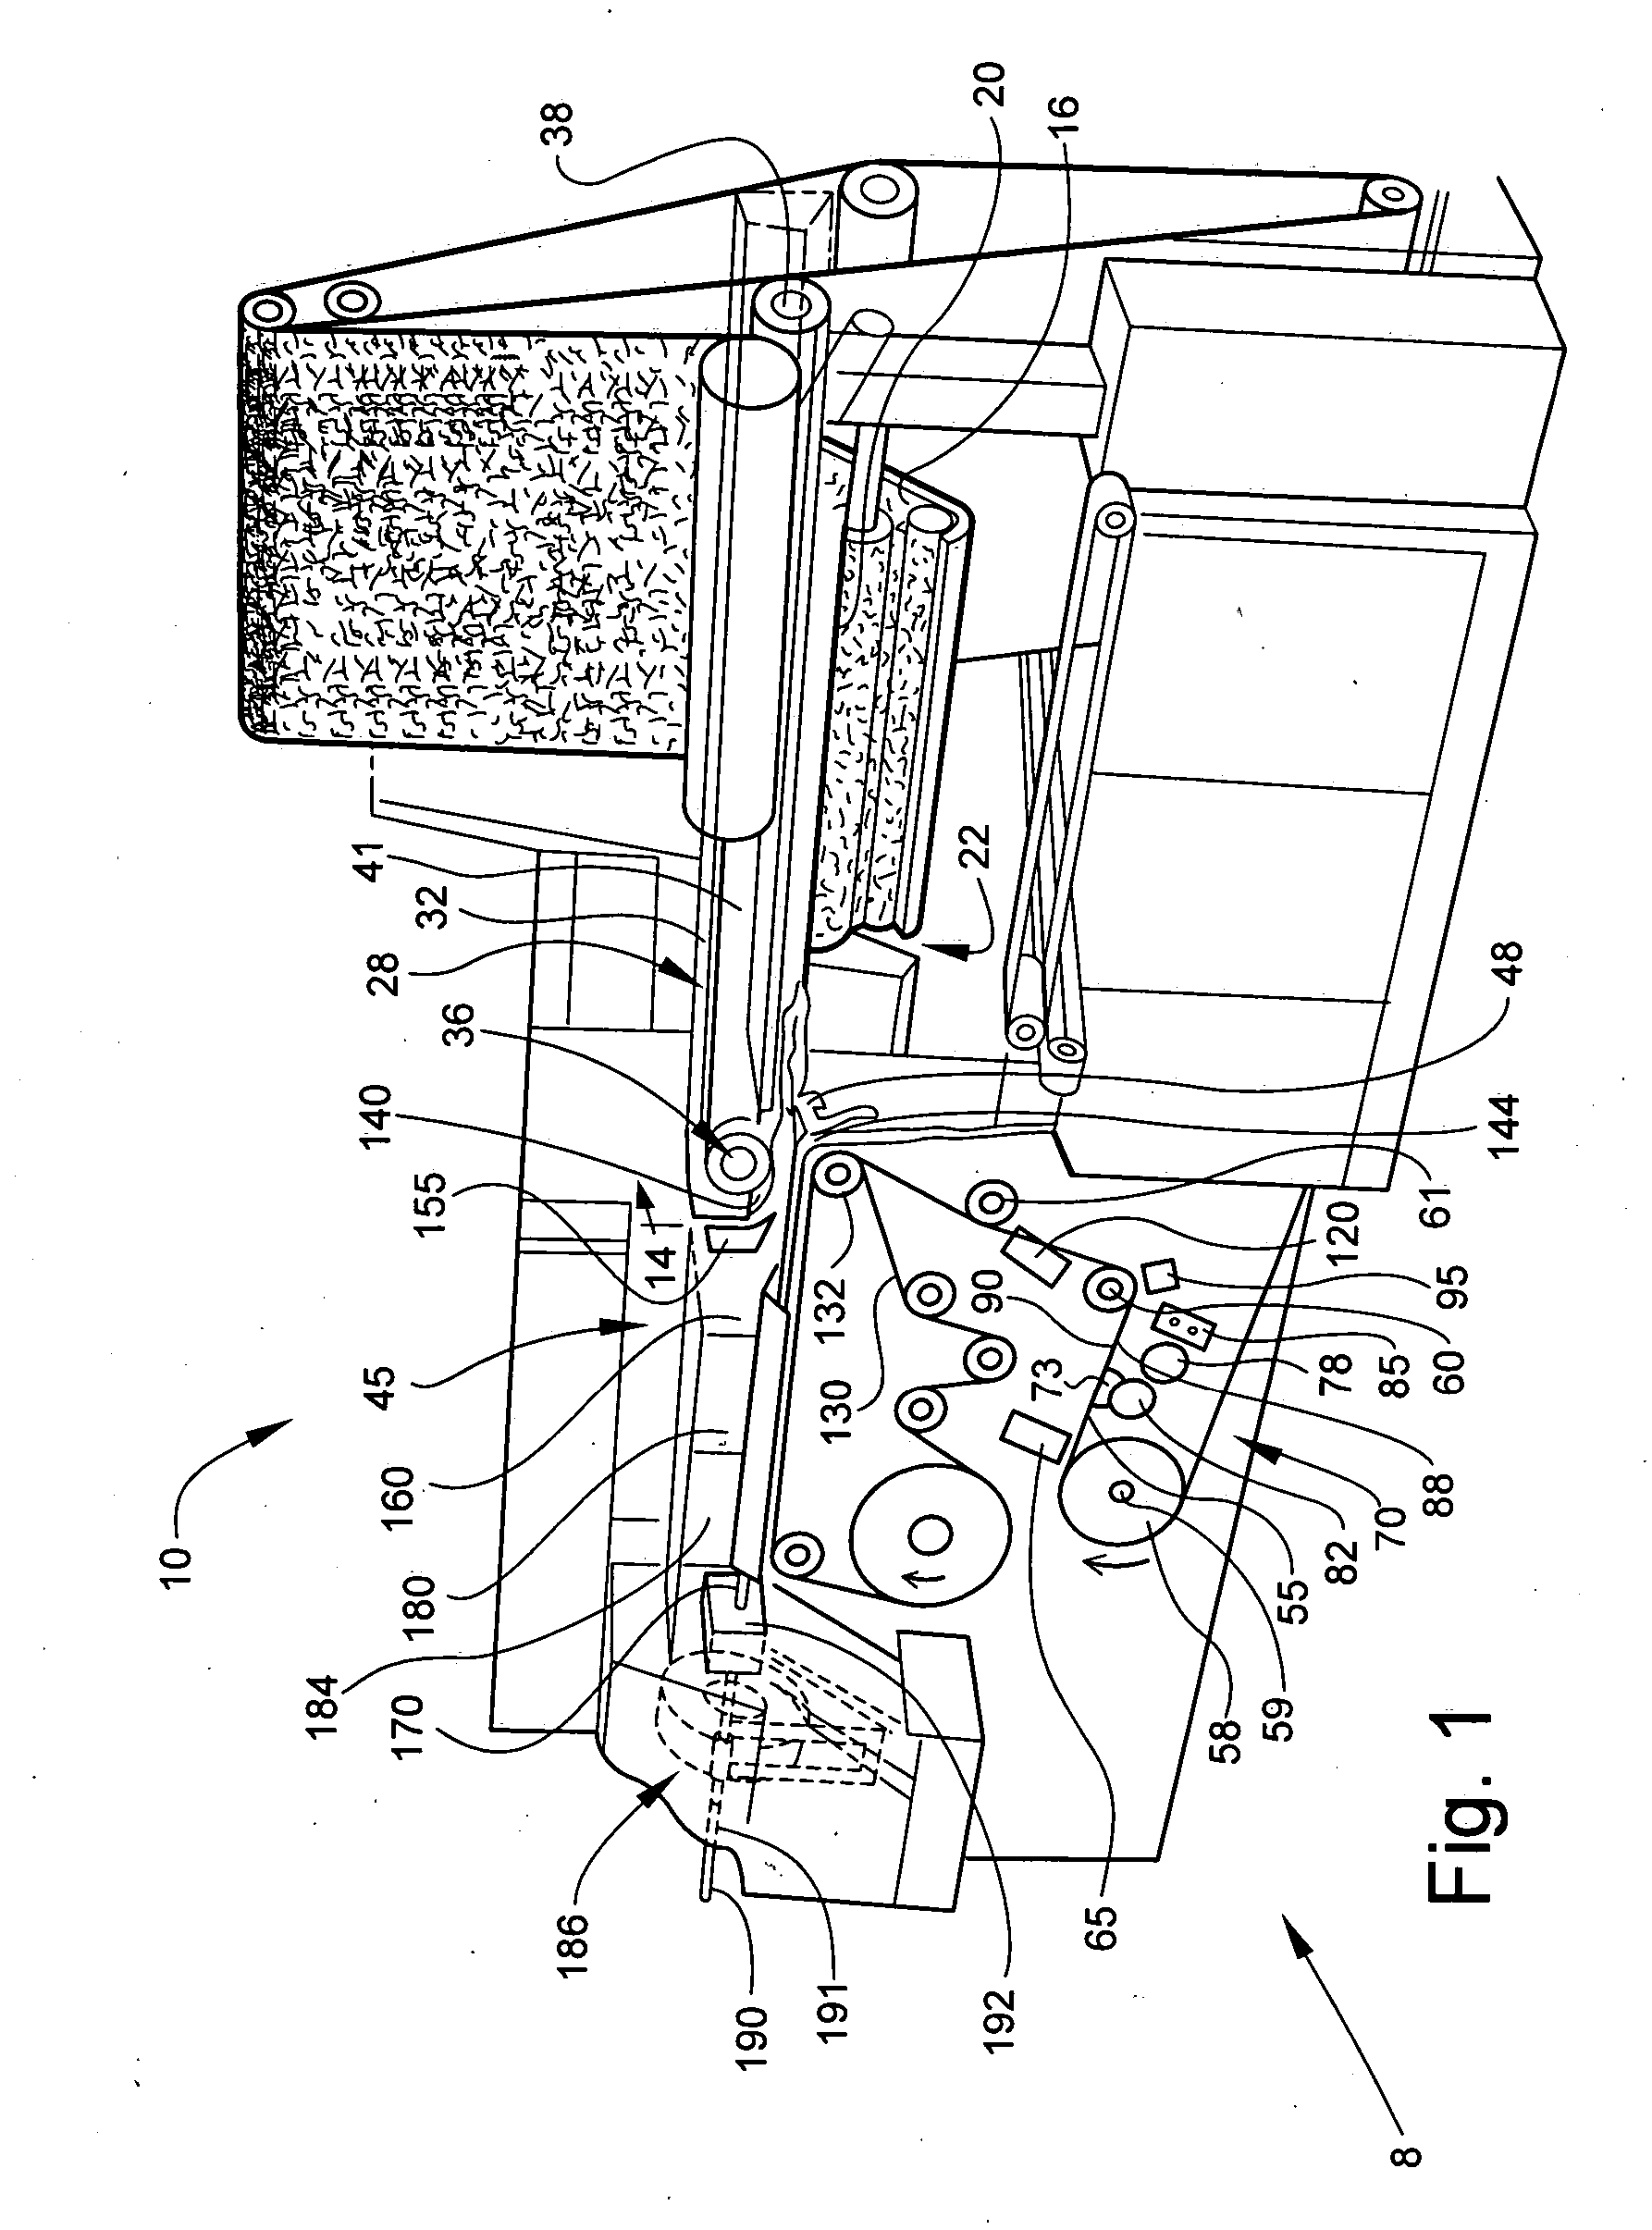 Materials, equipment and methods for manufacturing cigarettes